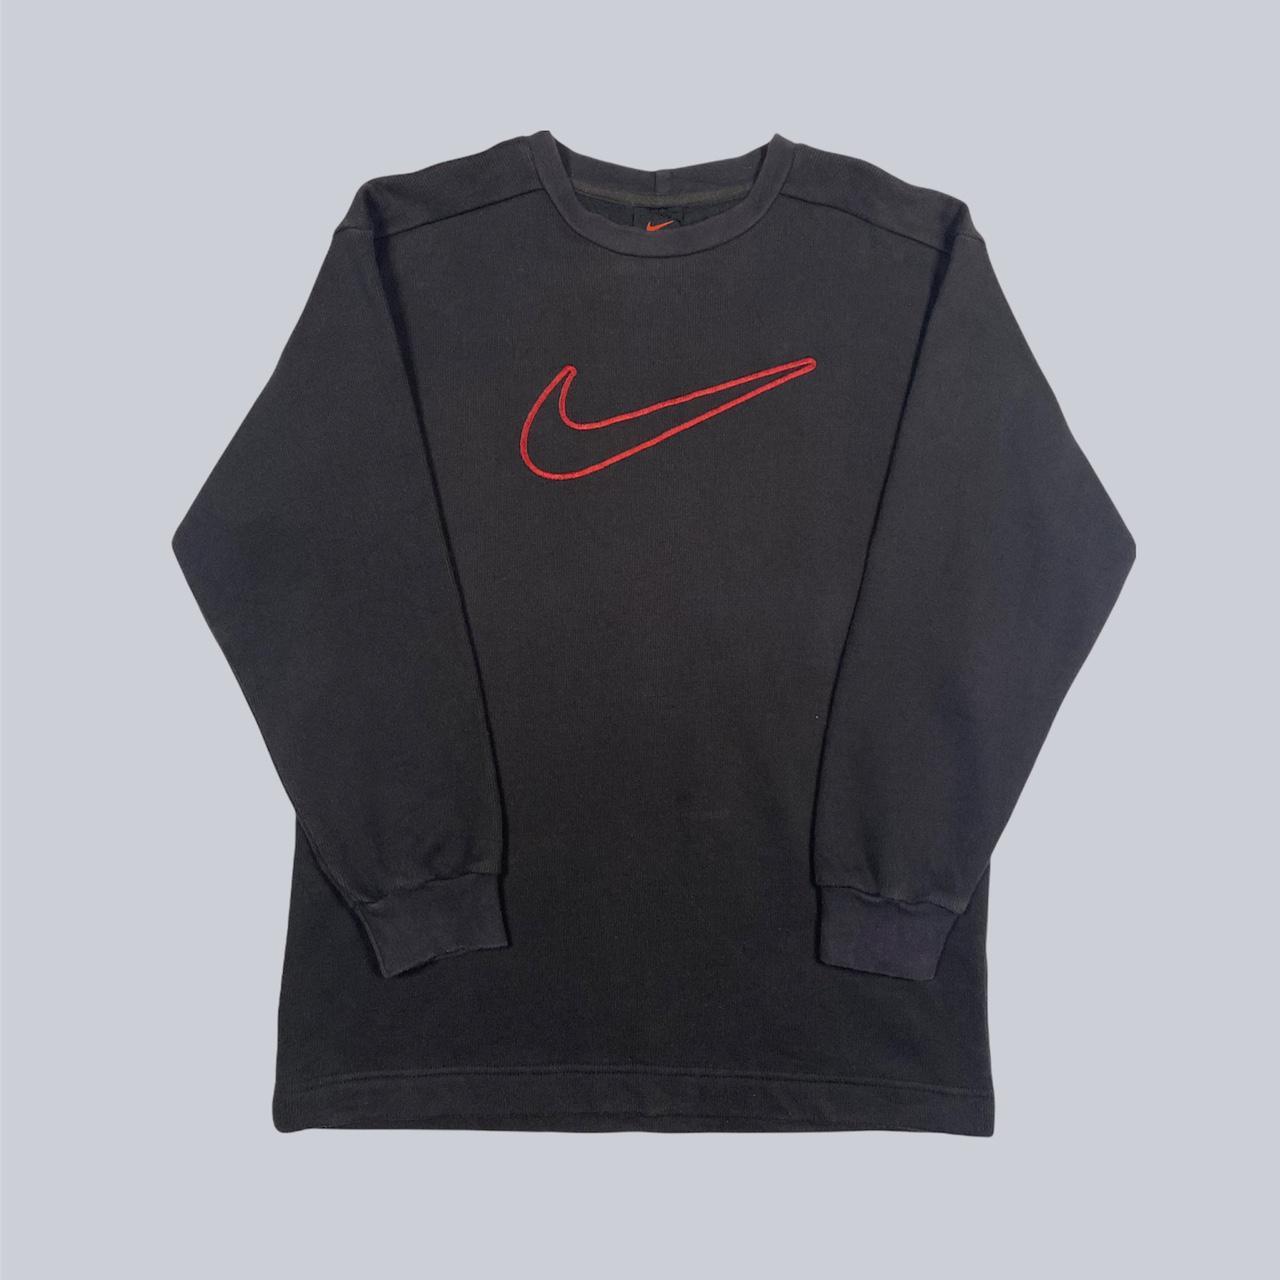 Nike Sweatshirt , Black with embroidered red